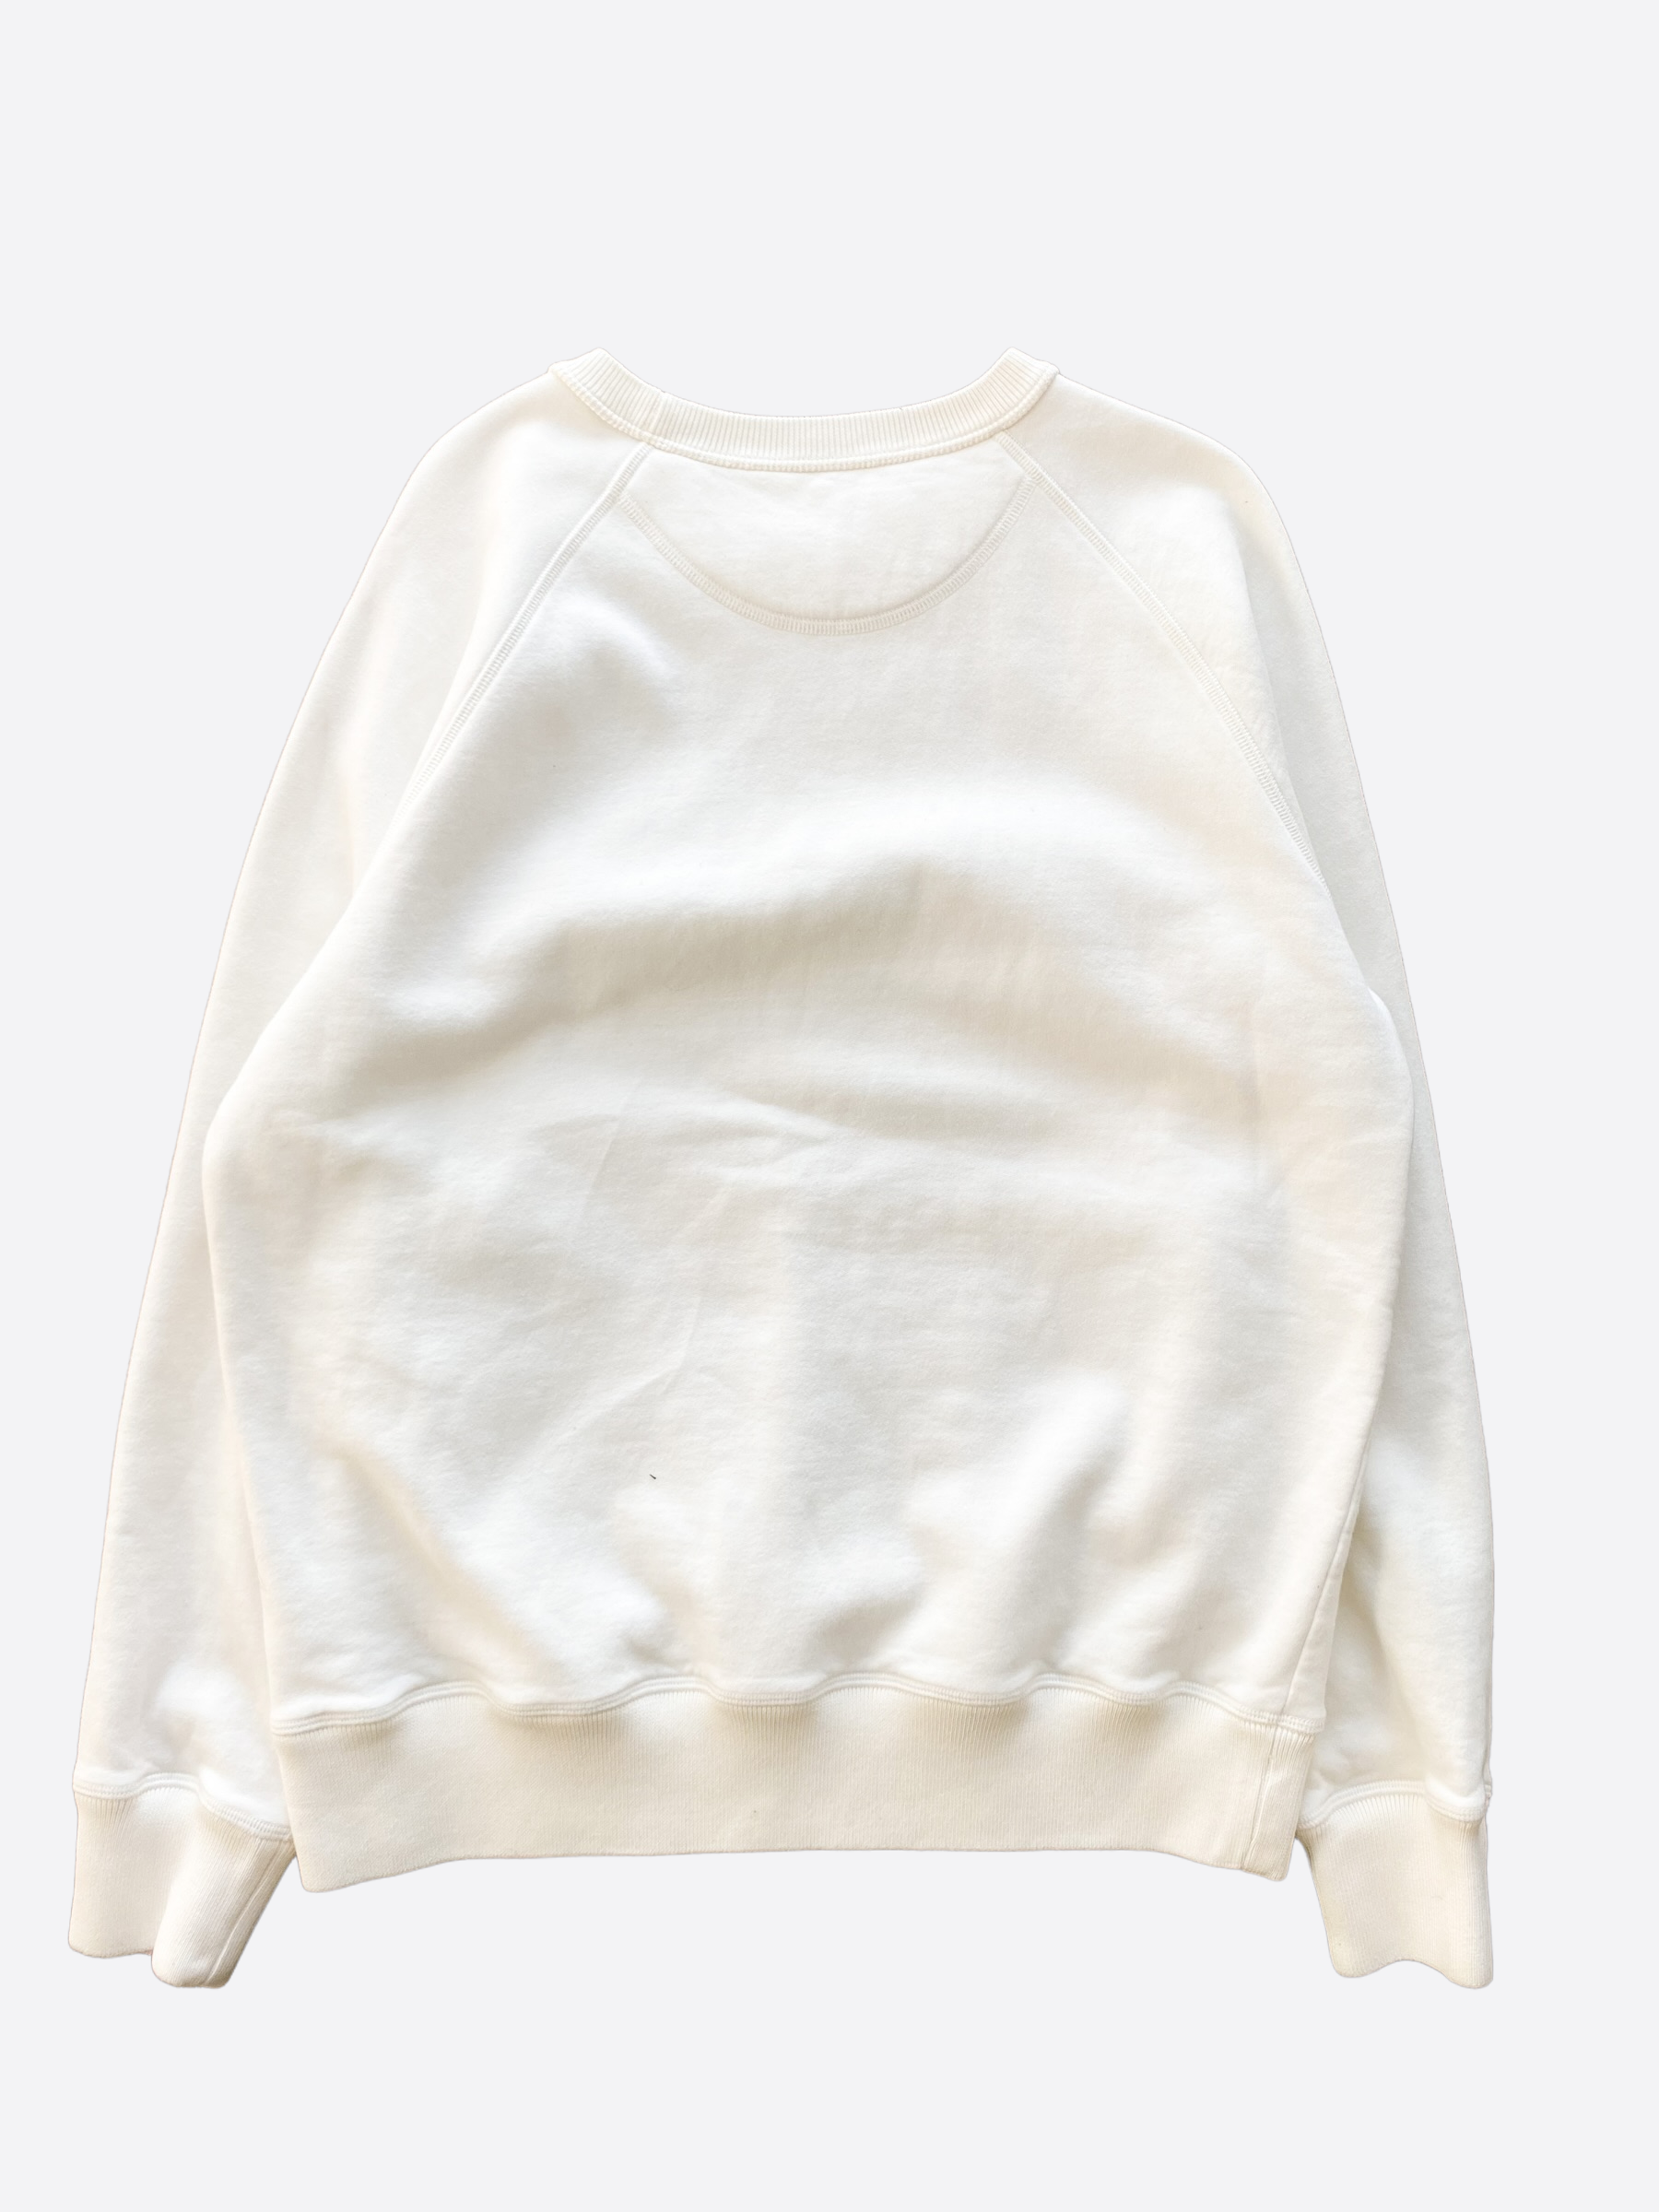 Louis Vuitton Forever embroidered sweatshirt.